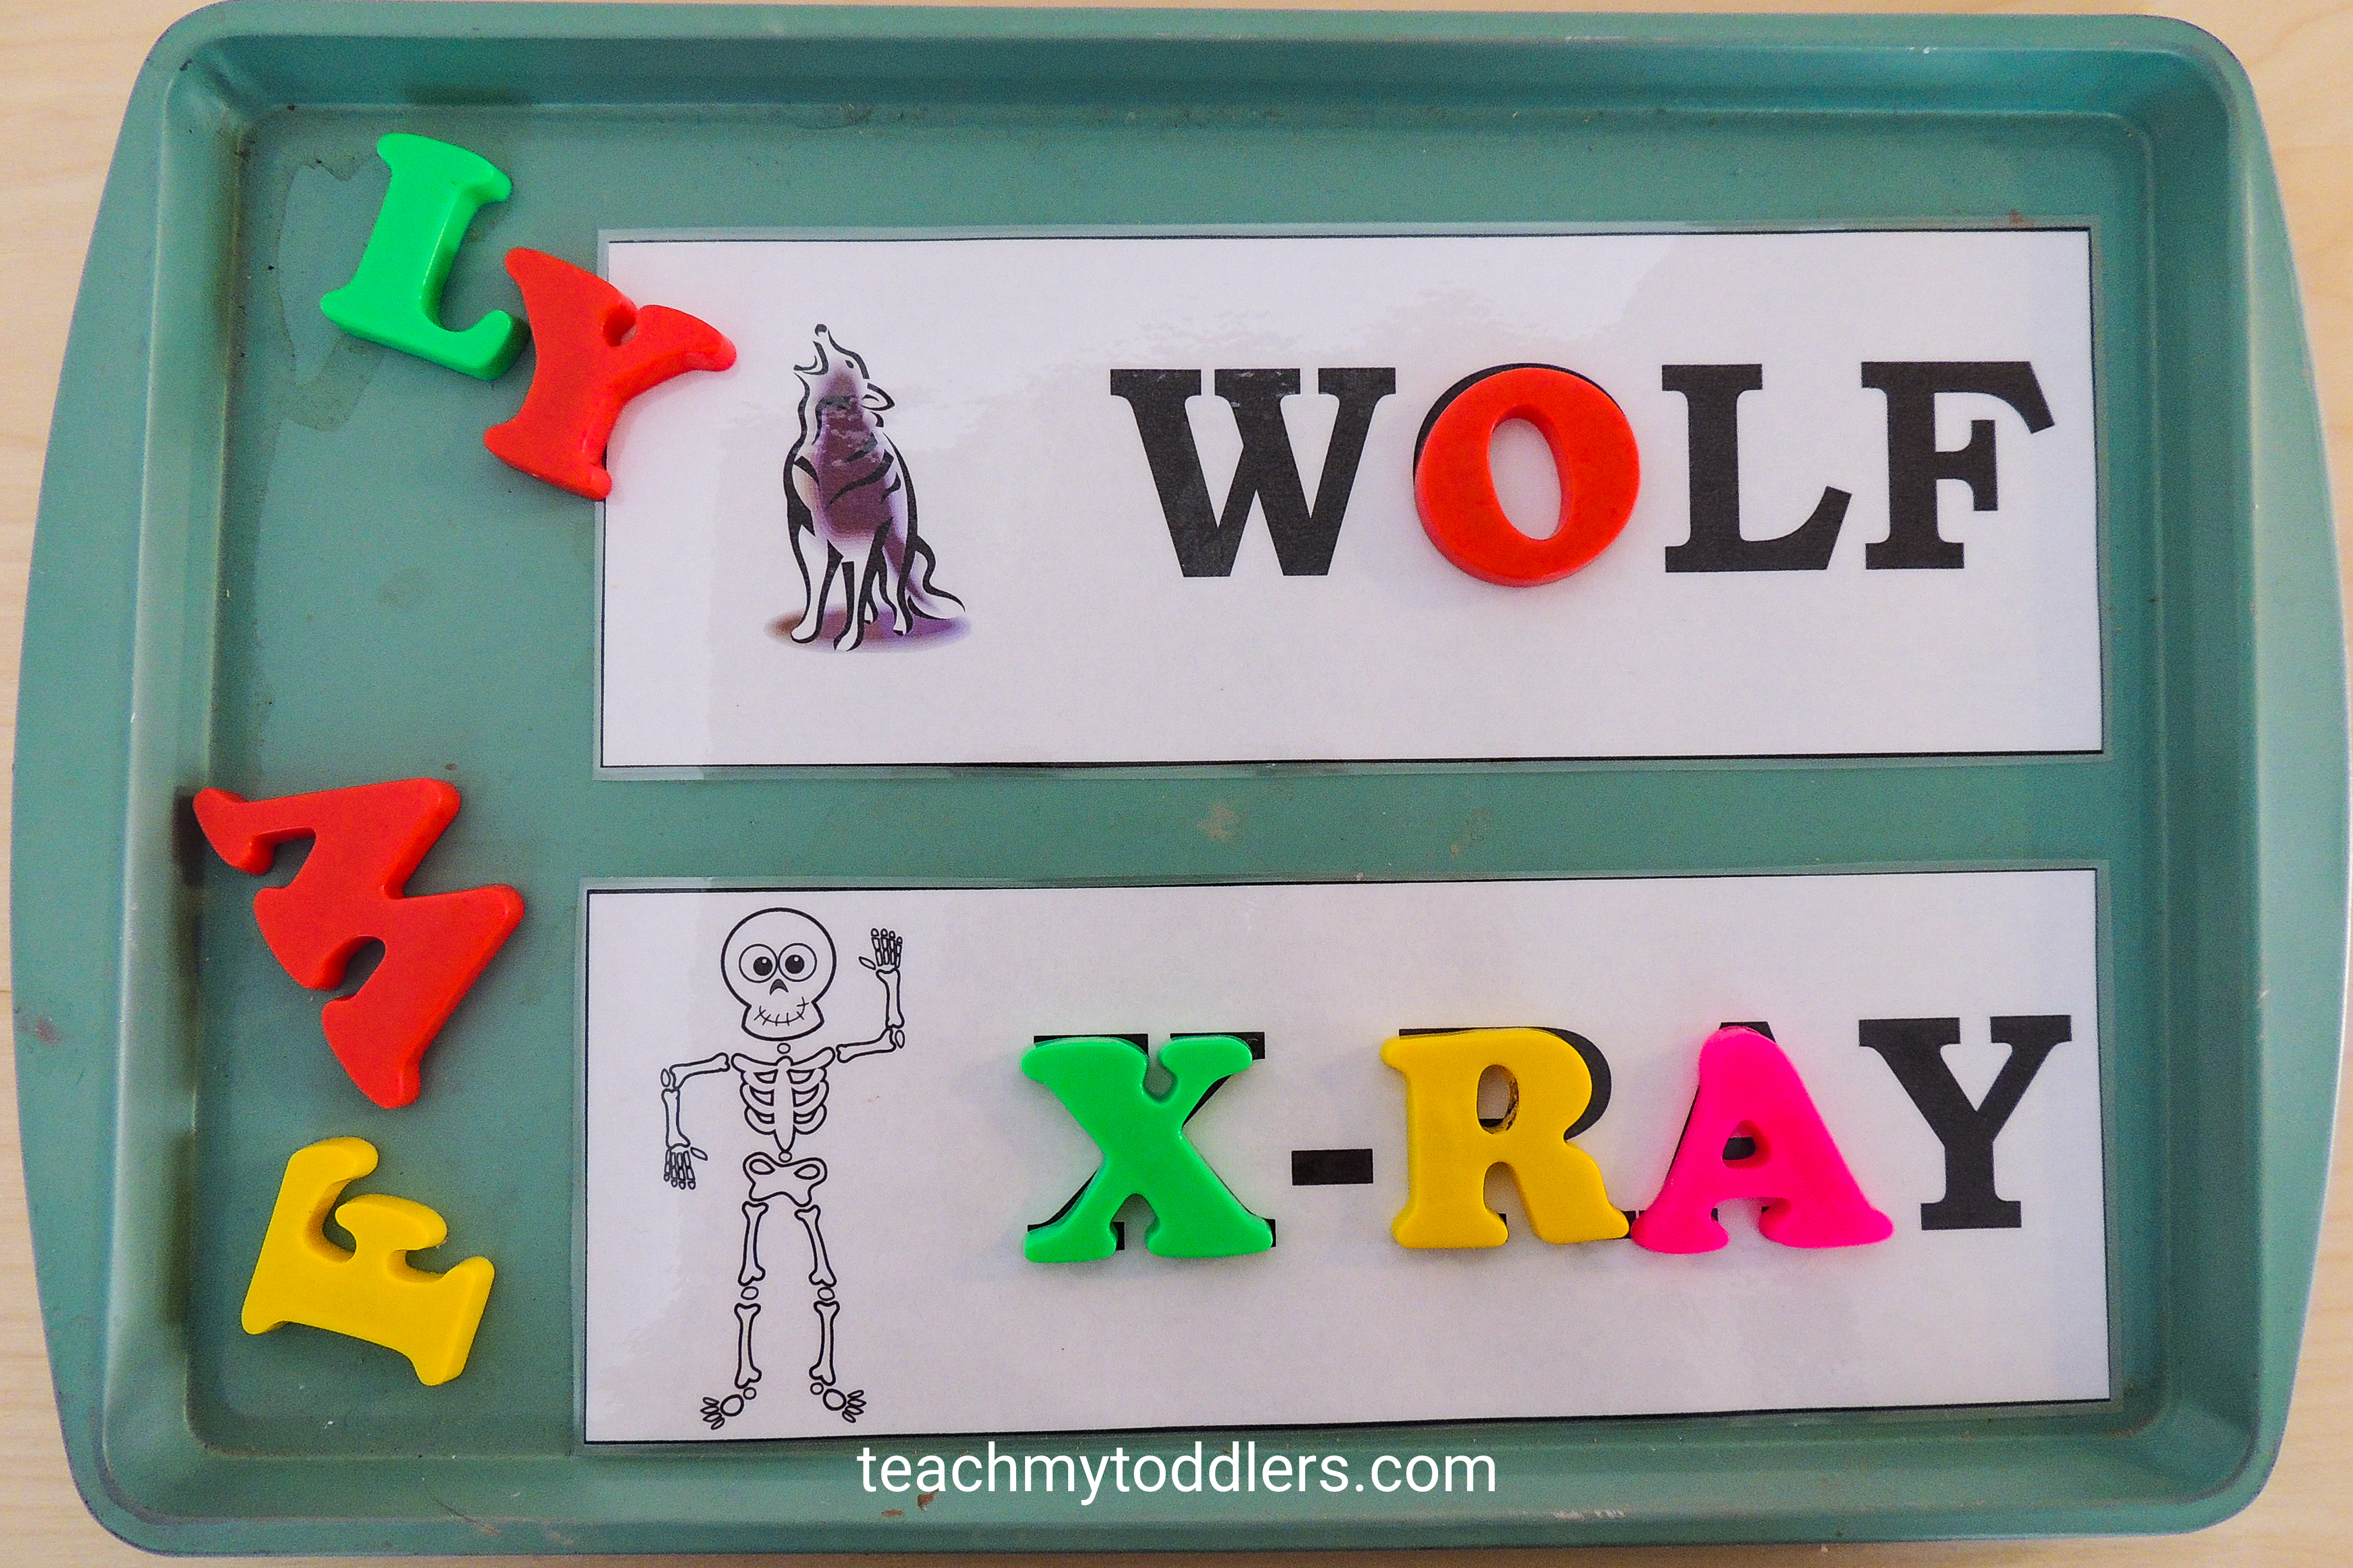 Discover how to use this fun magnetic match game to teach your toddlers letters